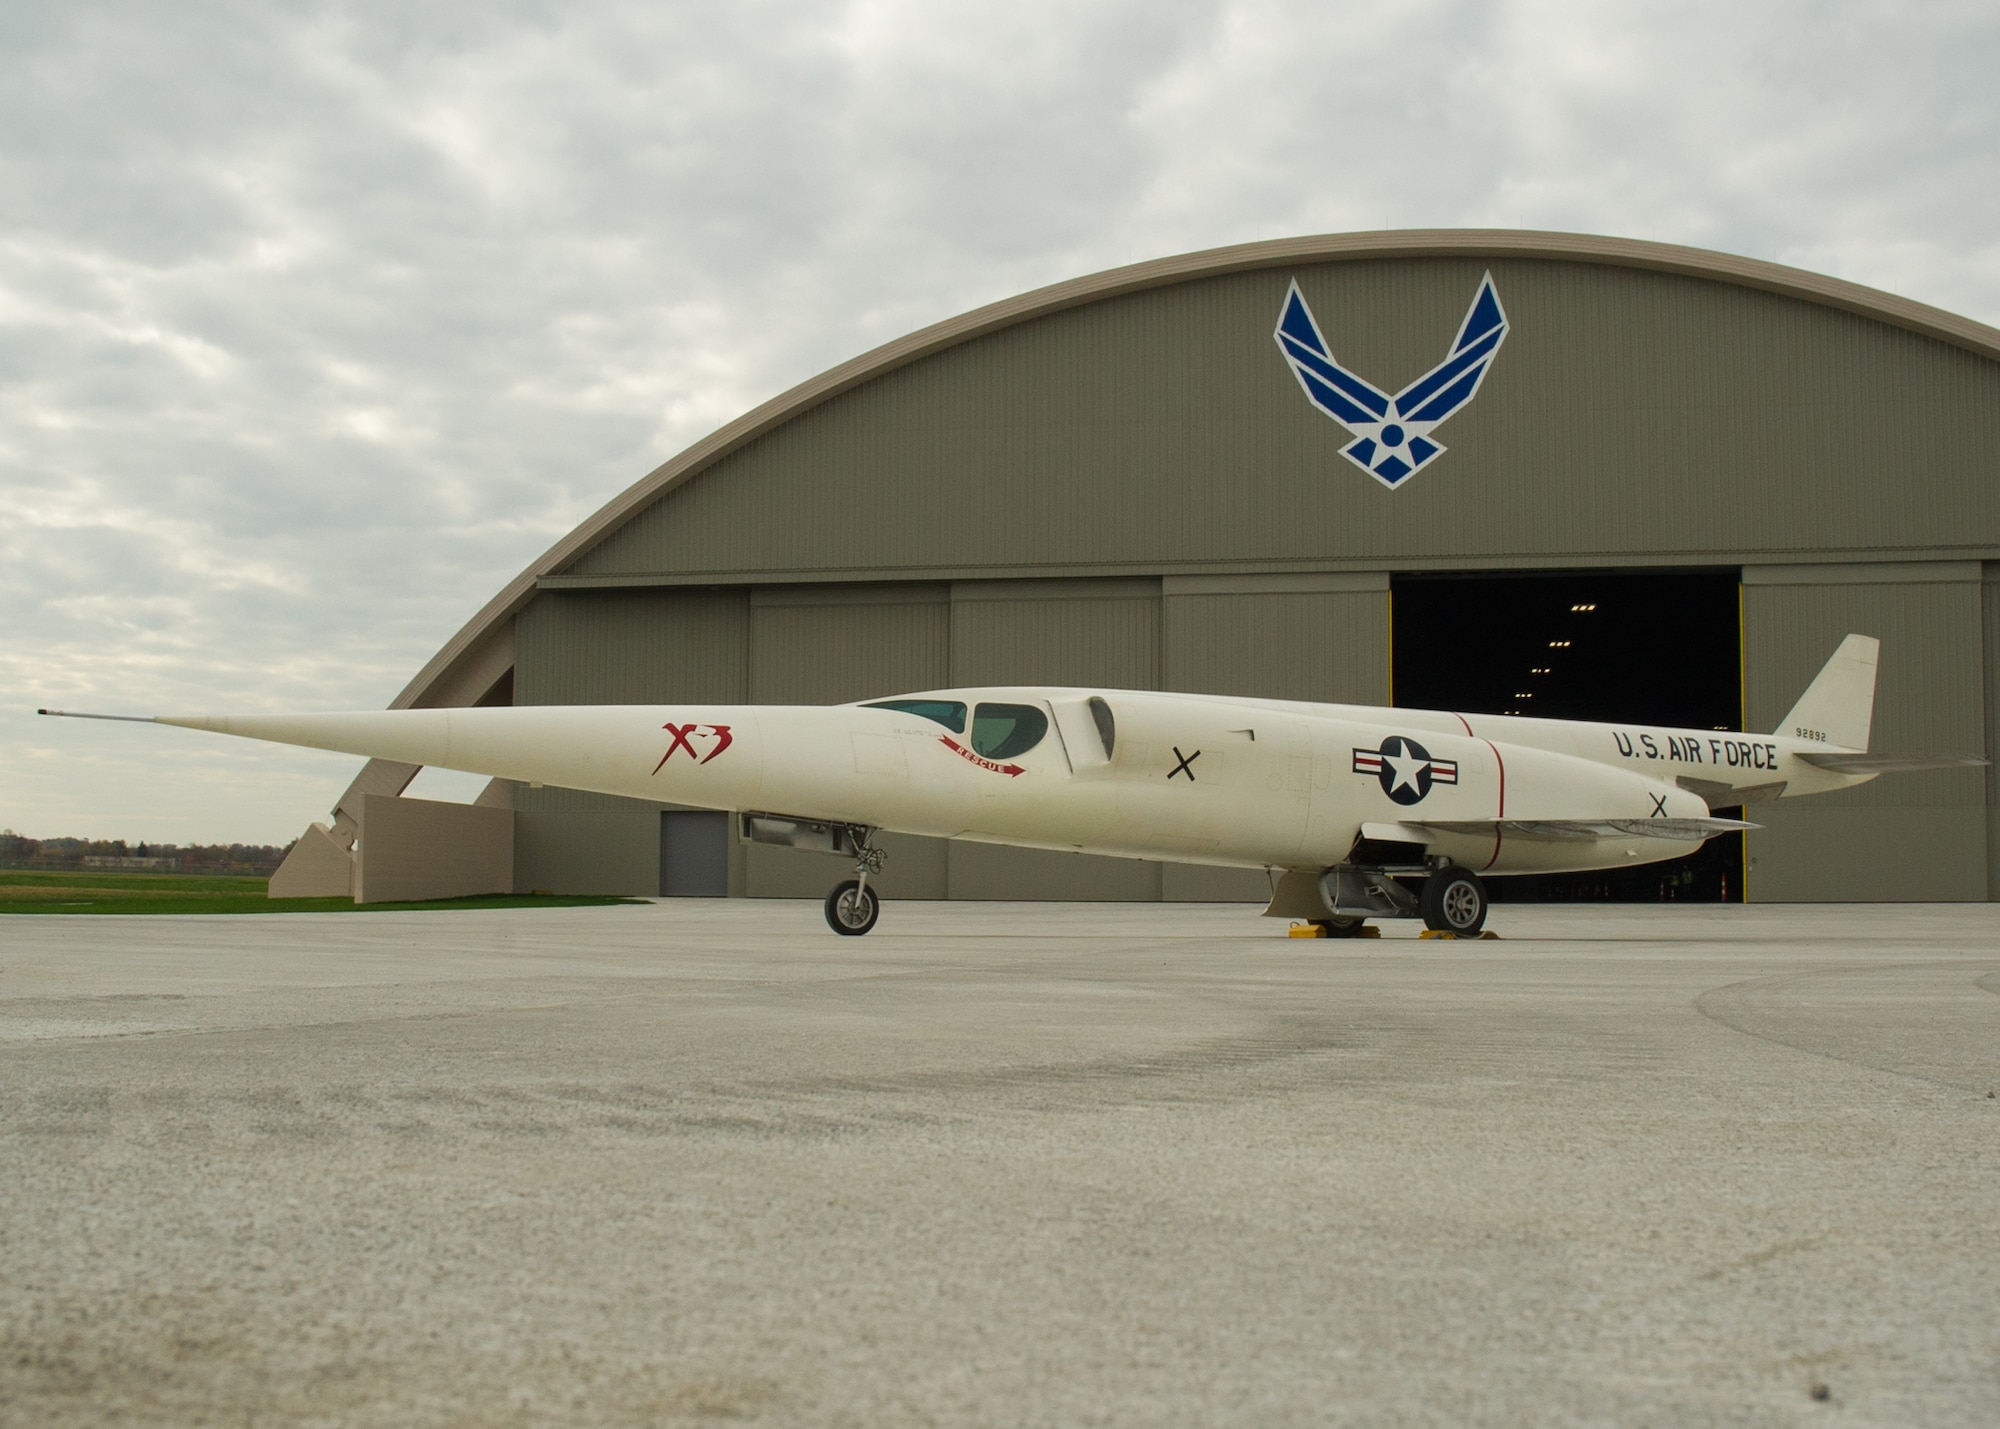 Restoration staff move the Douglas X-3 Stiletto into the new fourth building at the National Museum of the U.S. Air Force on Nov. 5, 2015. (U.S. Air Force photo by Ken LaRock)